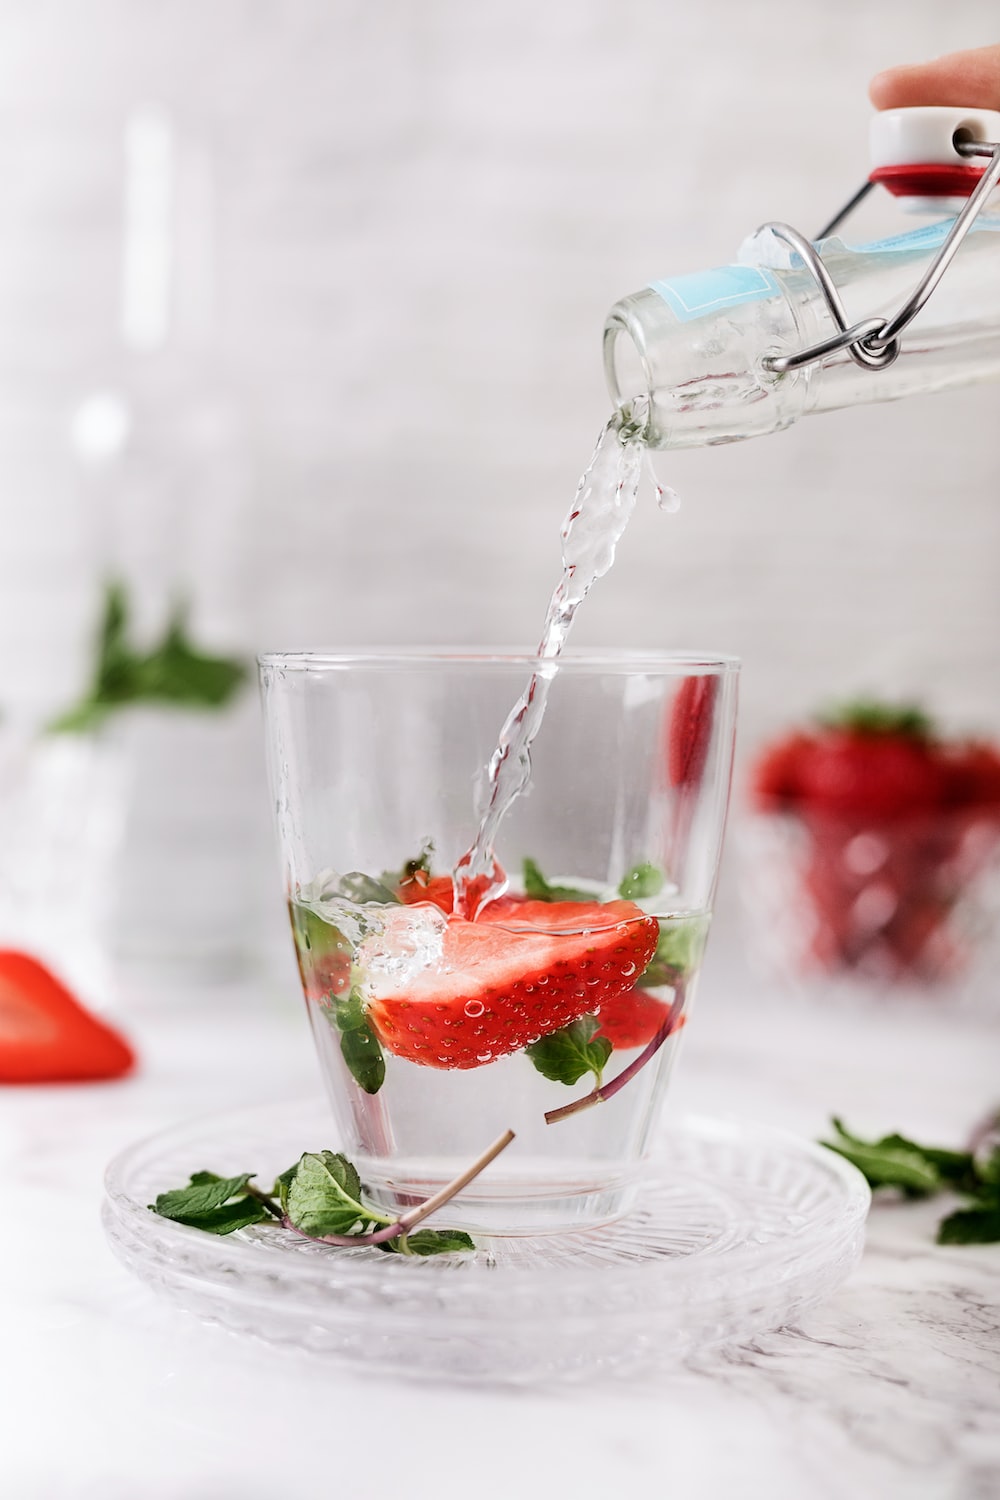 a person pouring water into a glass filled with strawberries